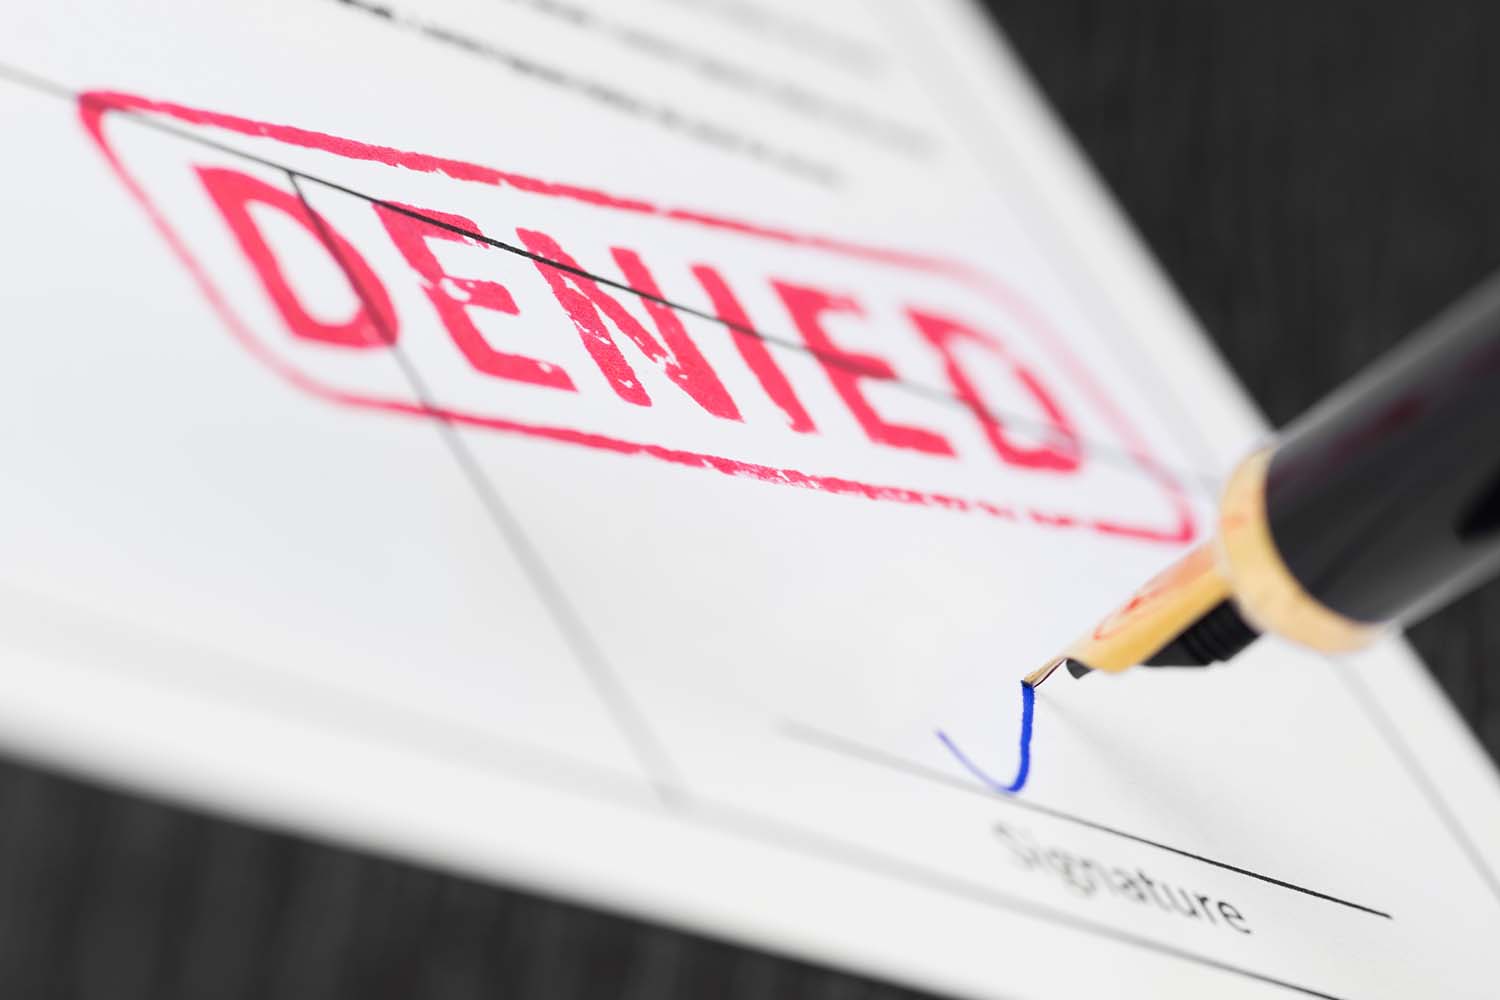 Was Your VA Claim for Service Connection Denied?